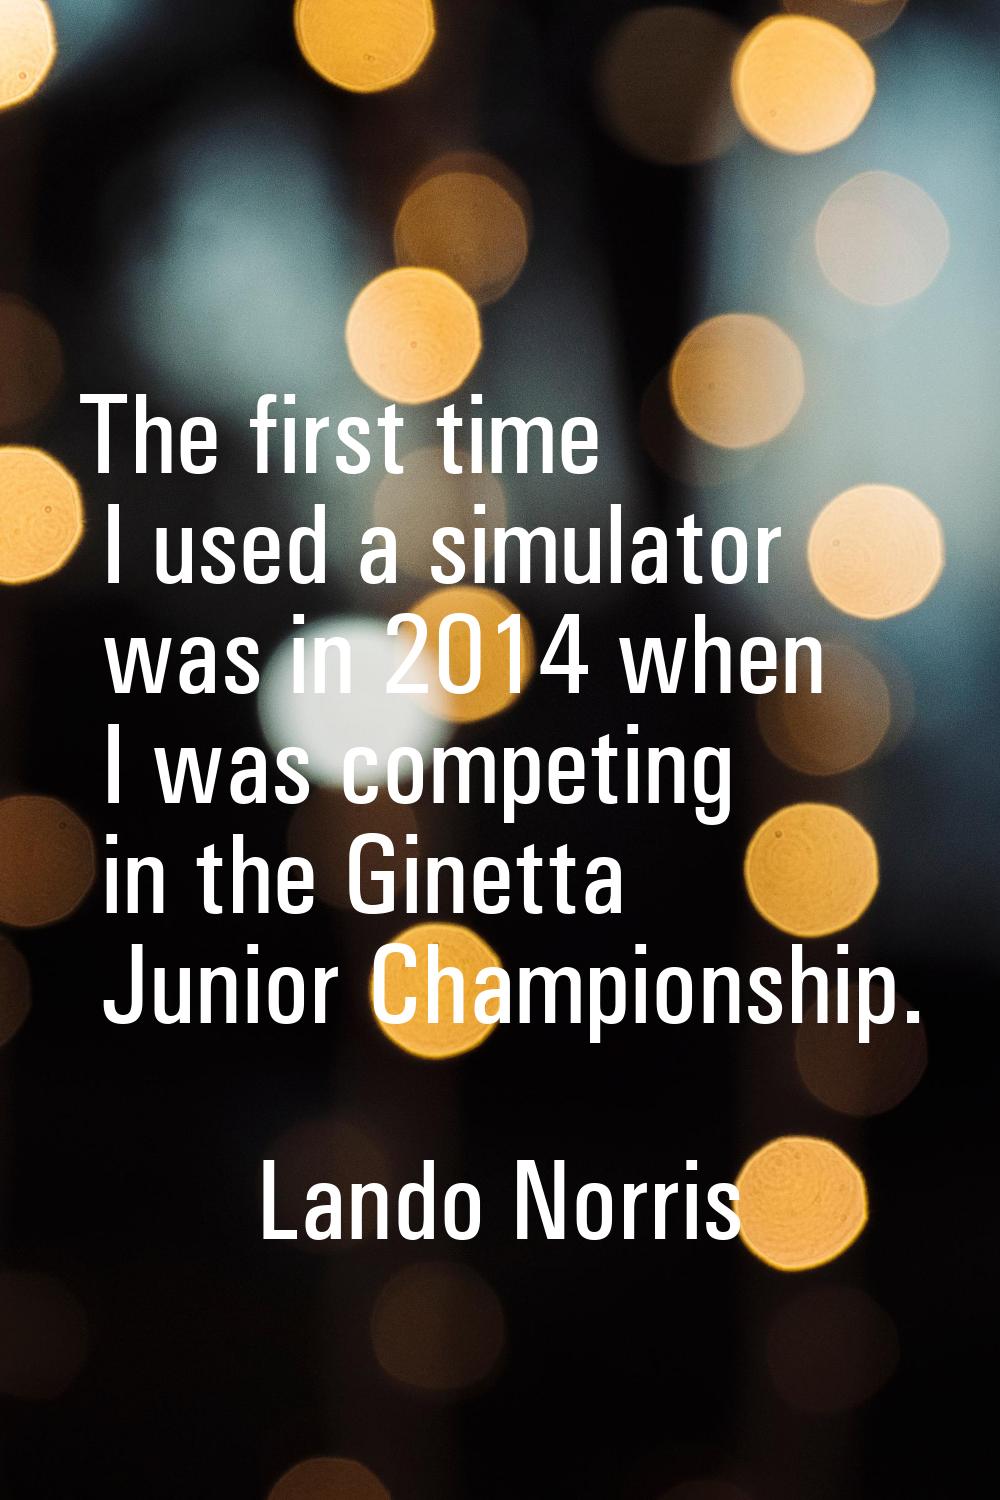 The first time I used a simulator was in 2014 when I was competing in the Ginetta Junior Championsh